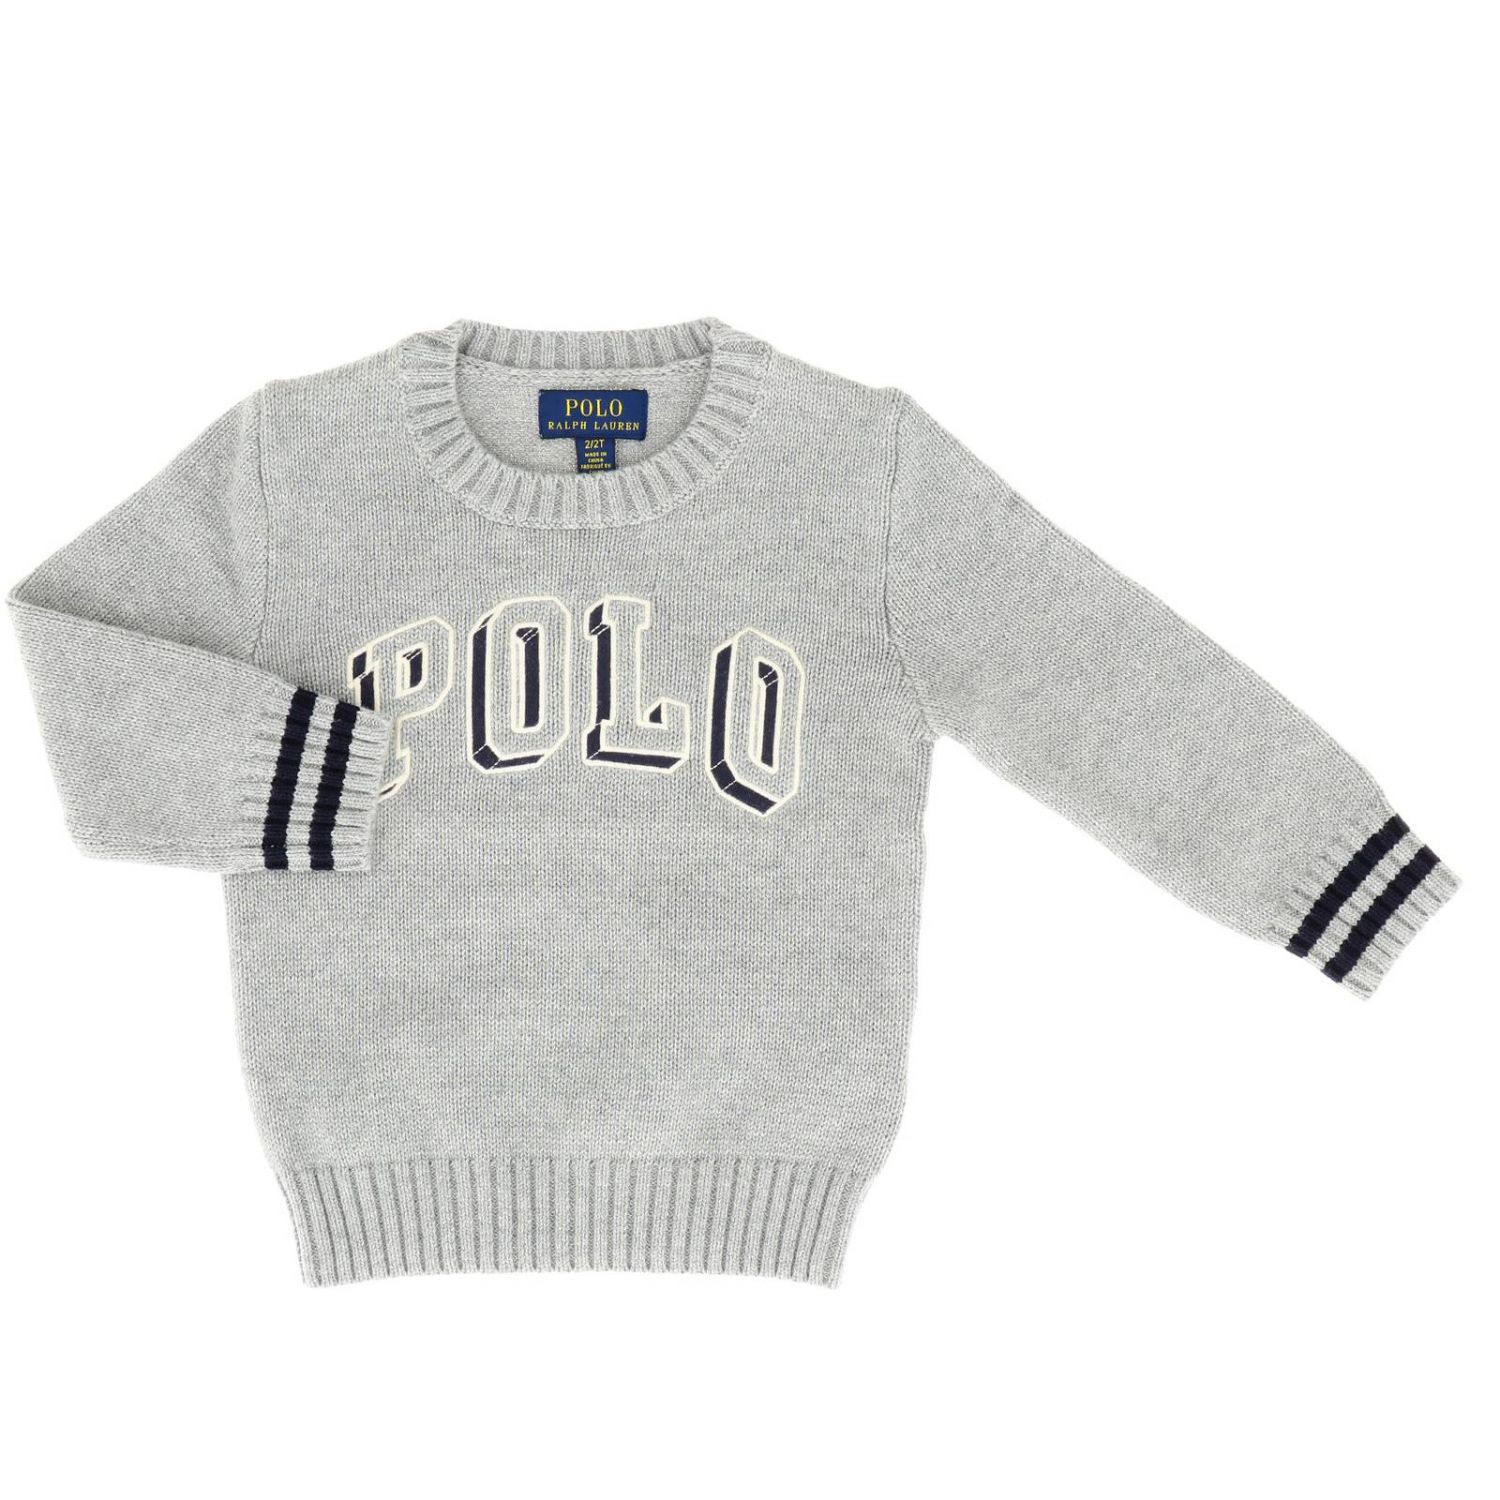 polo sweaters for toddlers